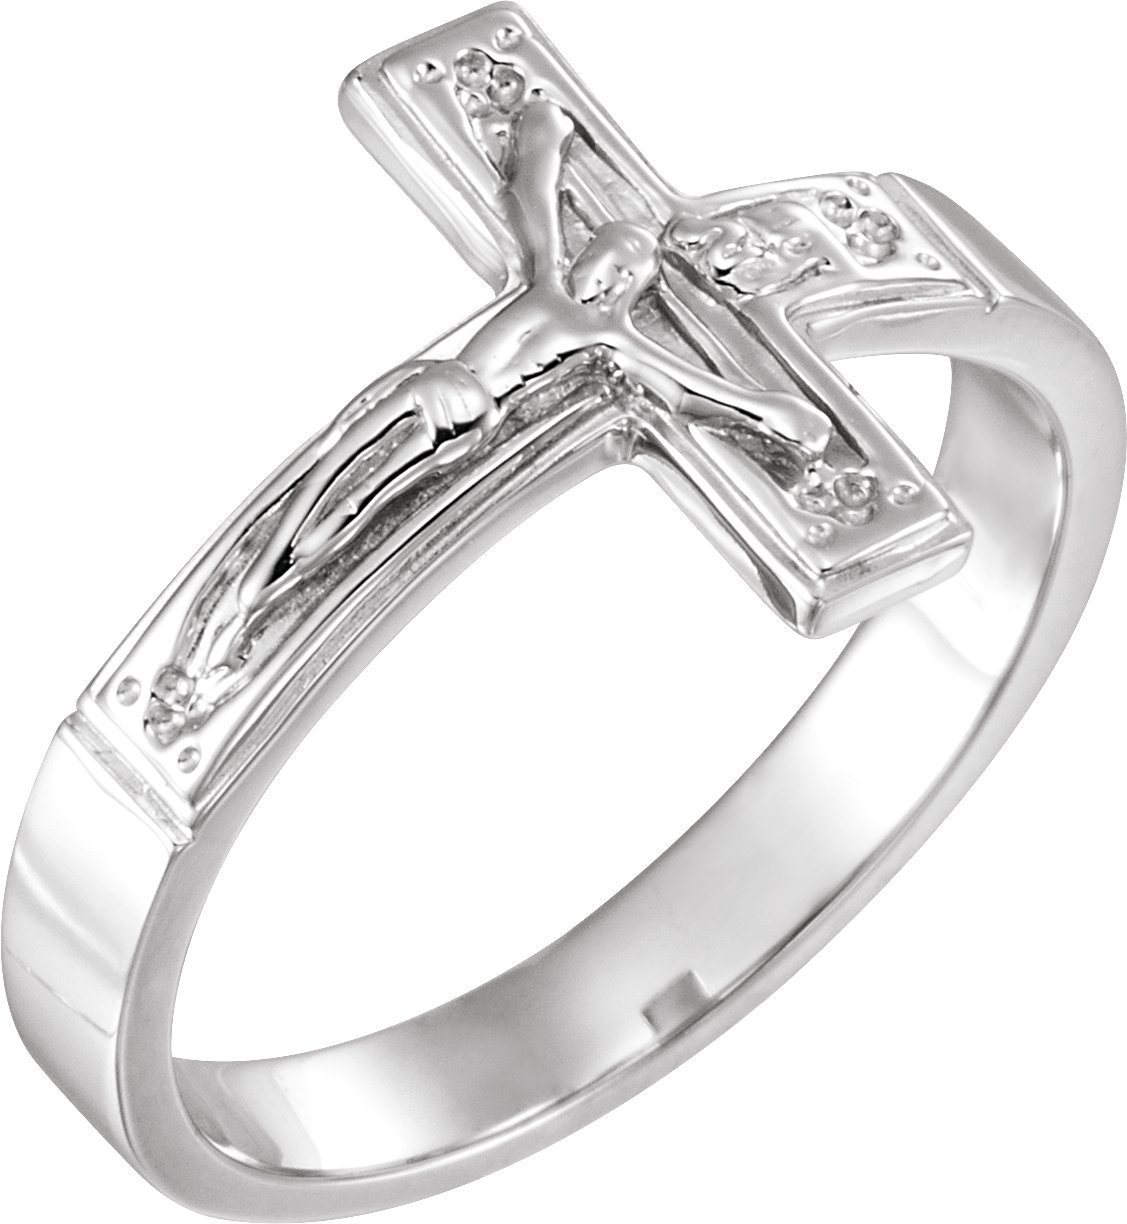 Sterling Silver 15 mm Crucifix Chastity Ring Size 11